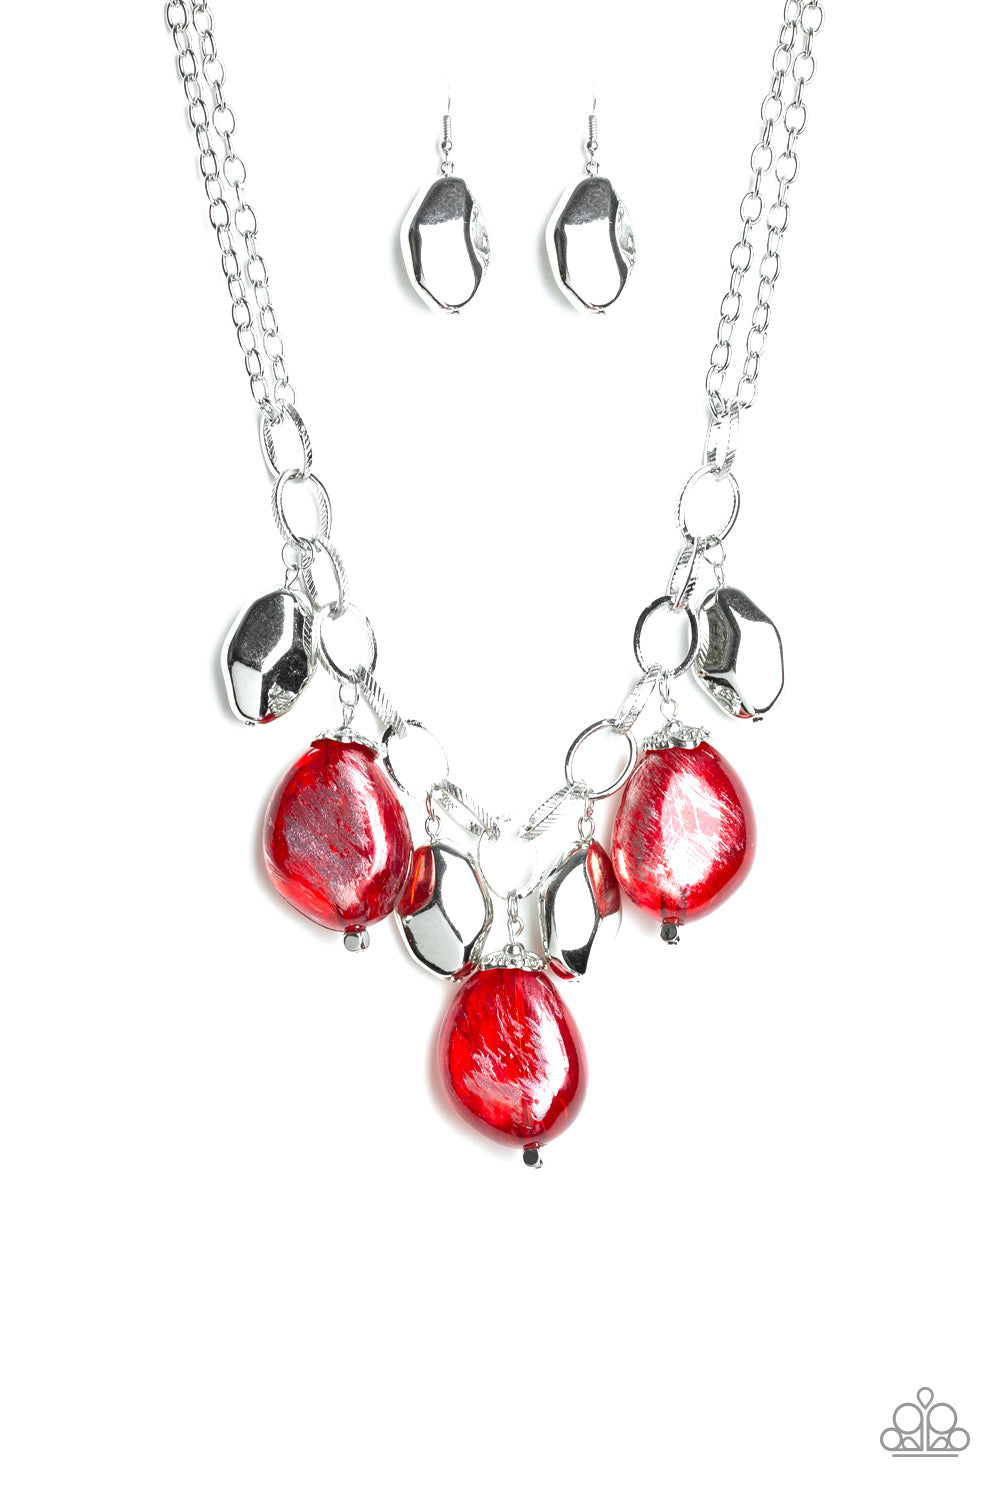 Paparazzi Necklace ~ Looking Glass Glamorous - Red